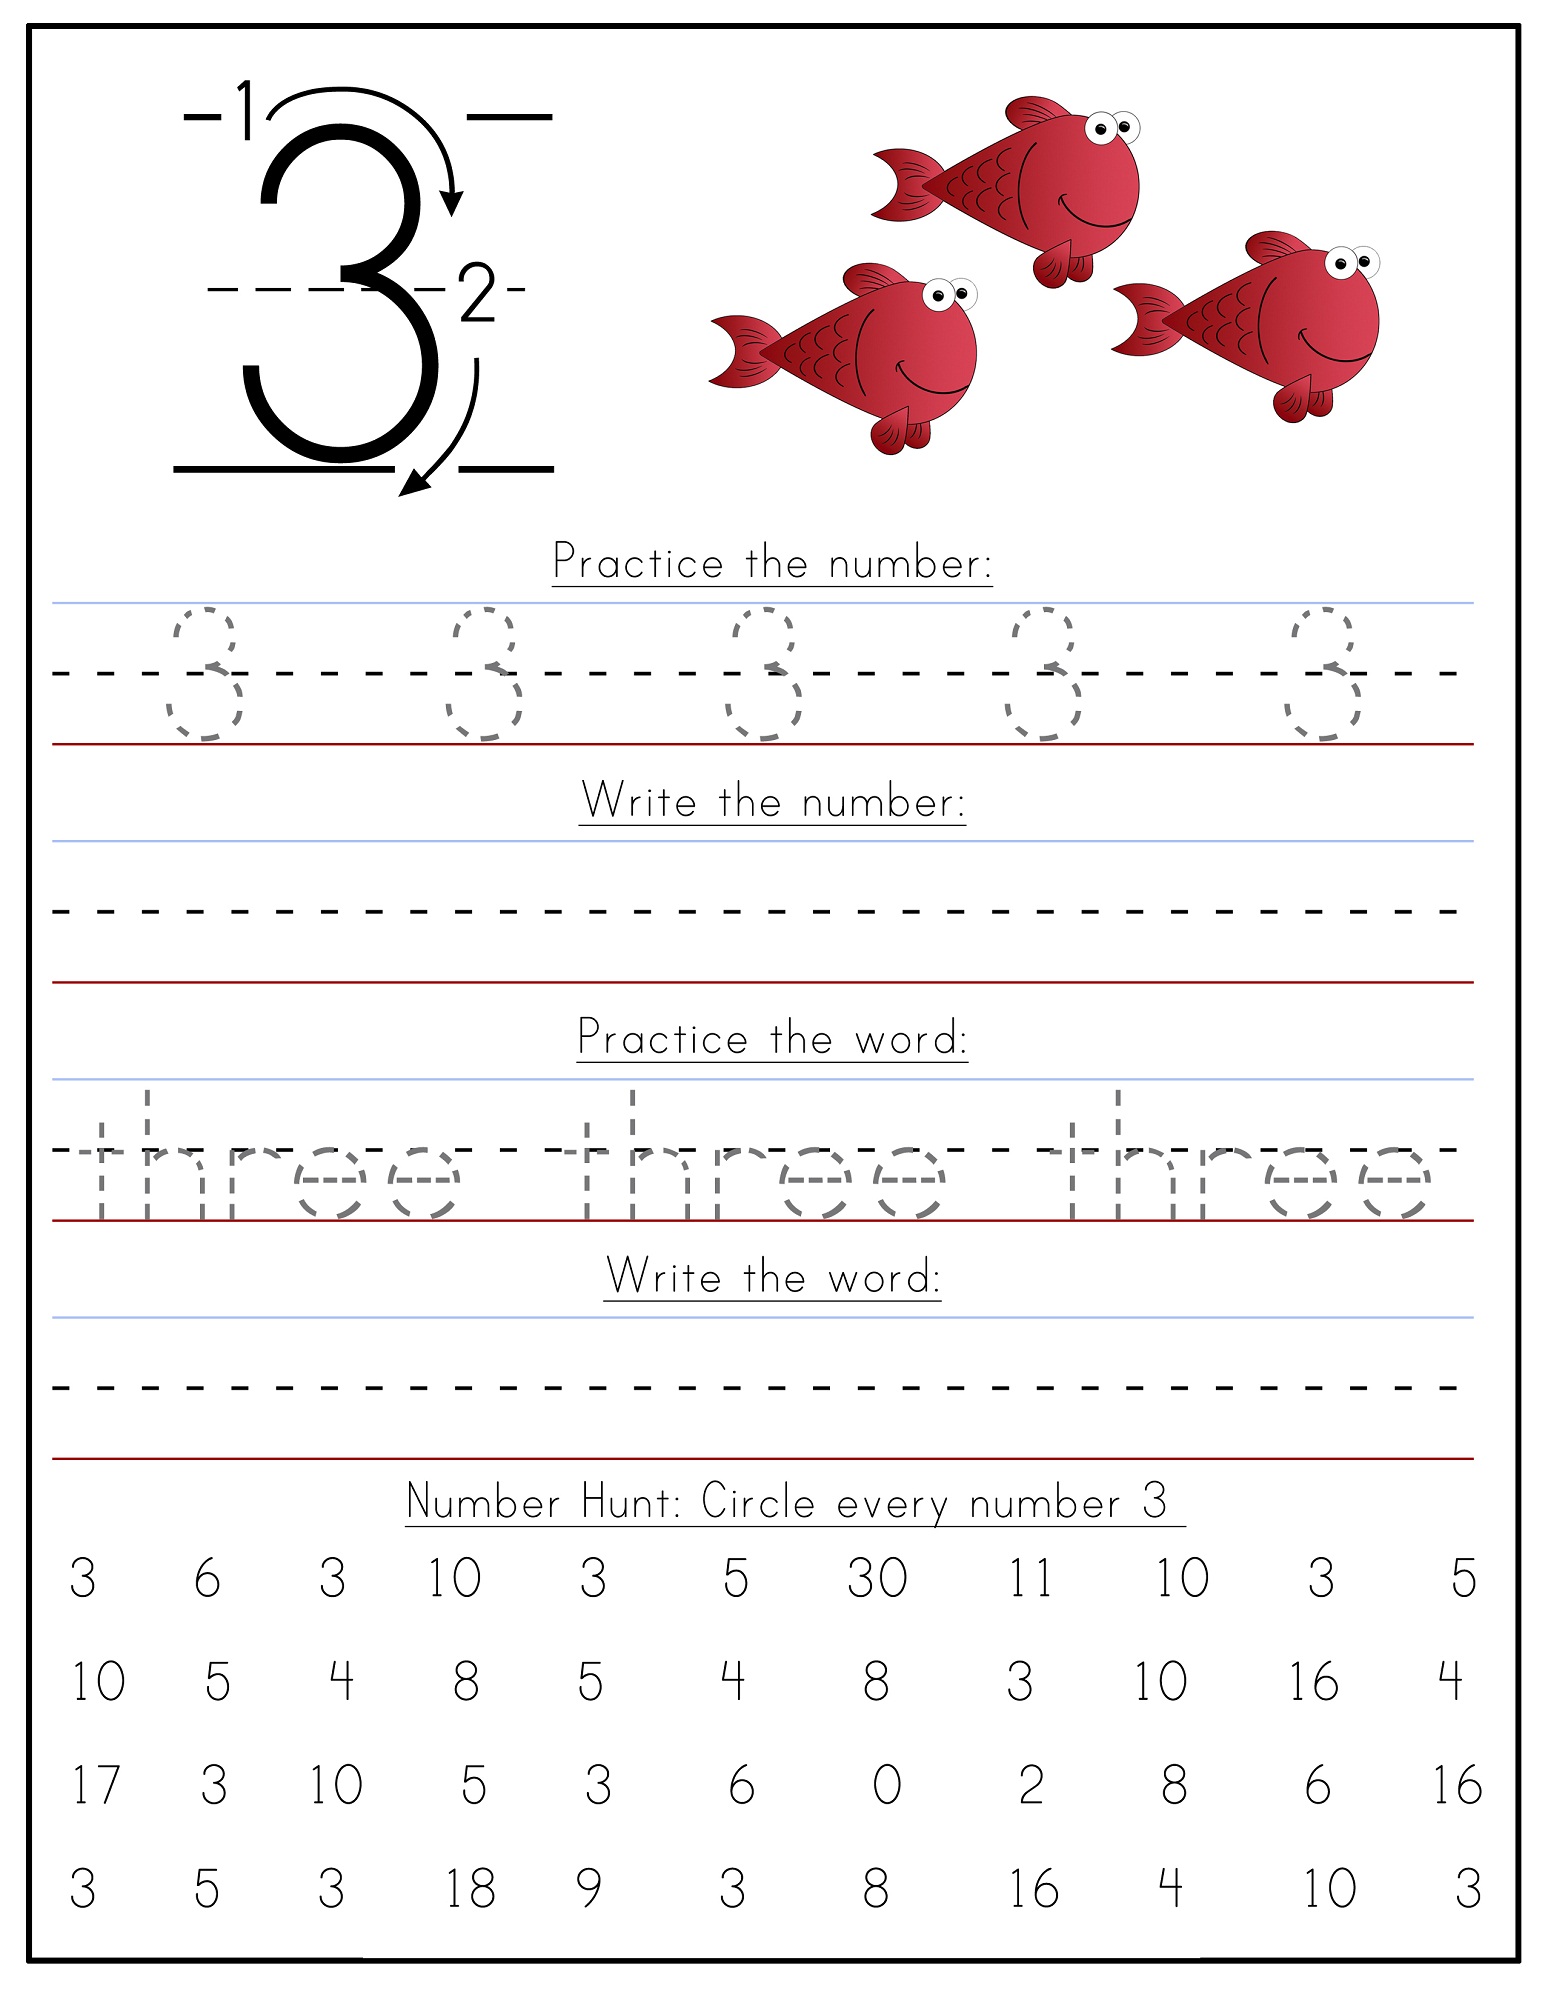 free-printable-worksheets-for-kids-tracing-numbers-1-20-worksheets-numbers-0-10-worksheets